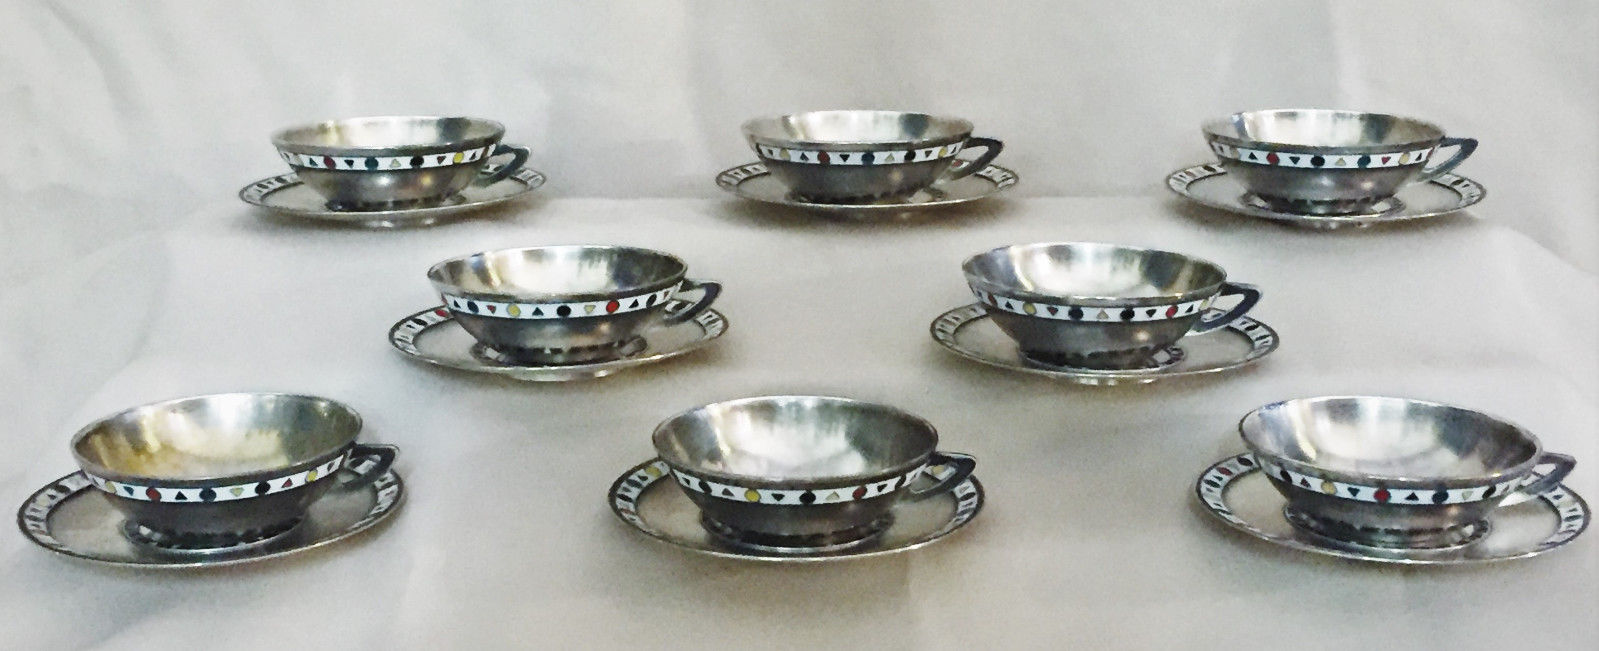 Mid-Century Modern Silver 916° & Enamel Set of 8 Coffee Cups & Saucers, 1960s